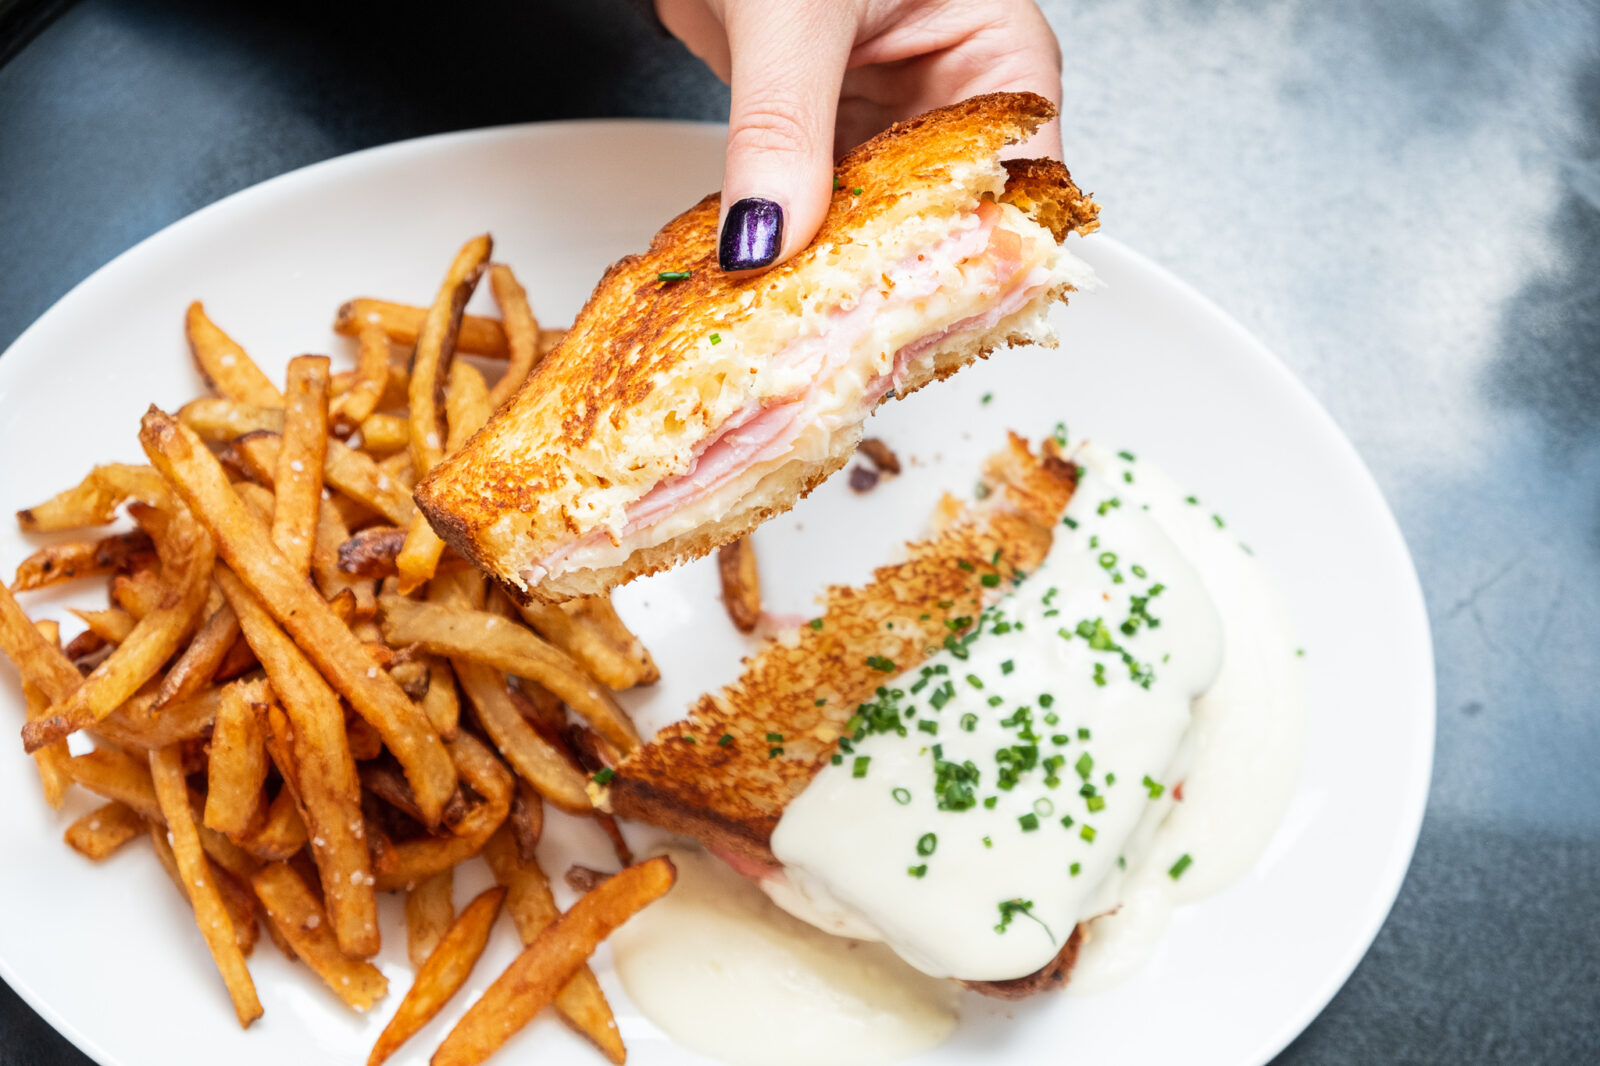 Mon Ami Gabi's croque monsieur available during New Year's Day brunch.